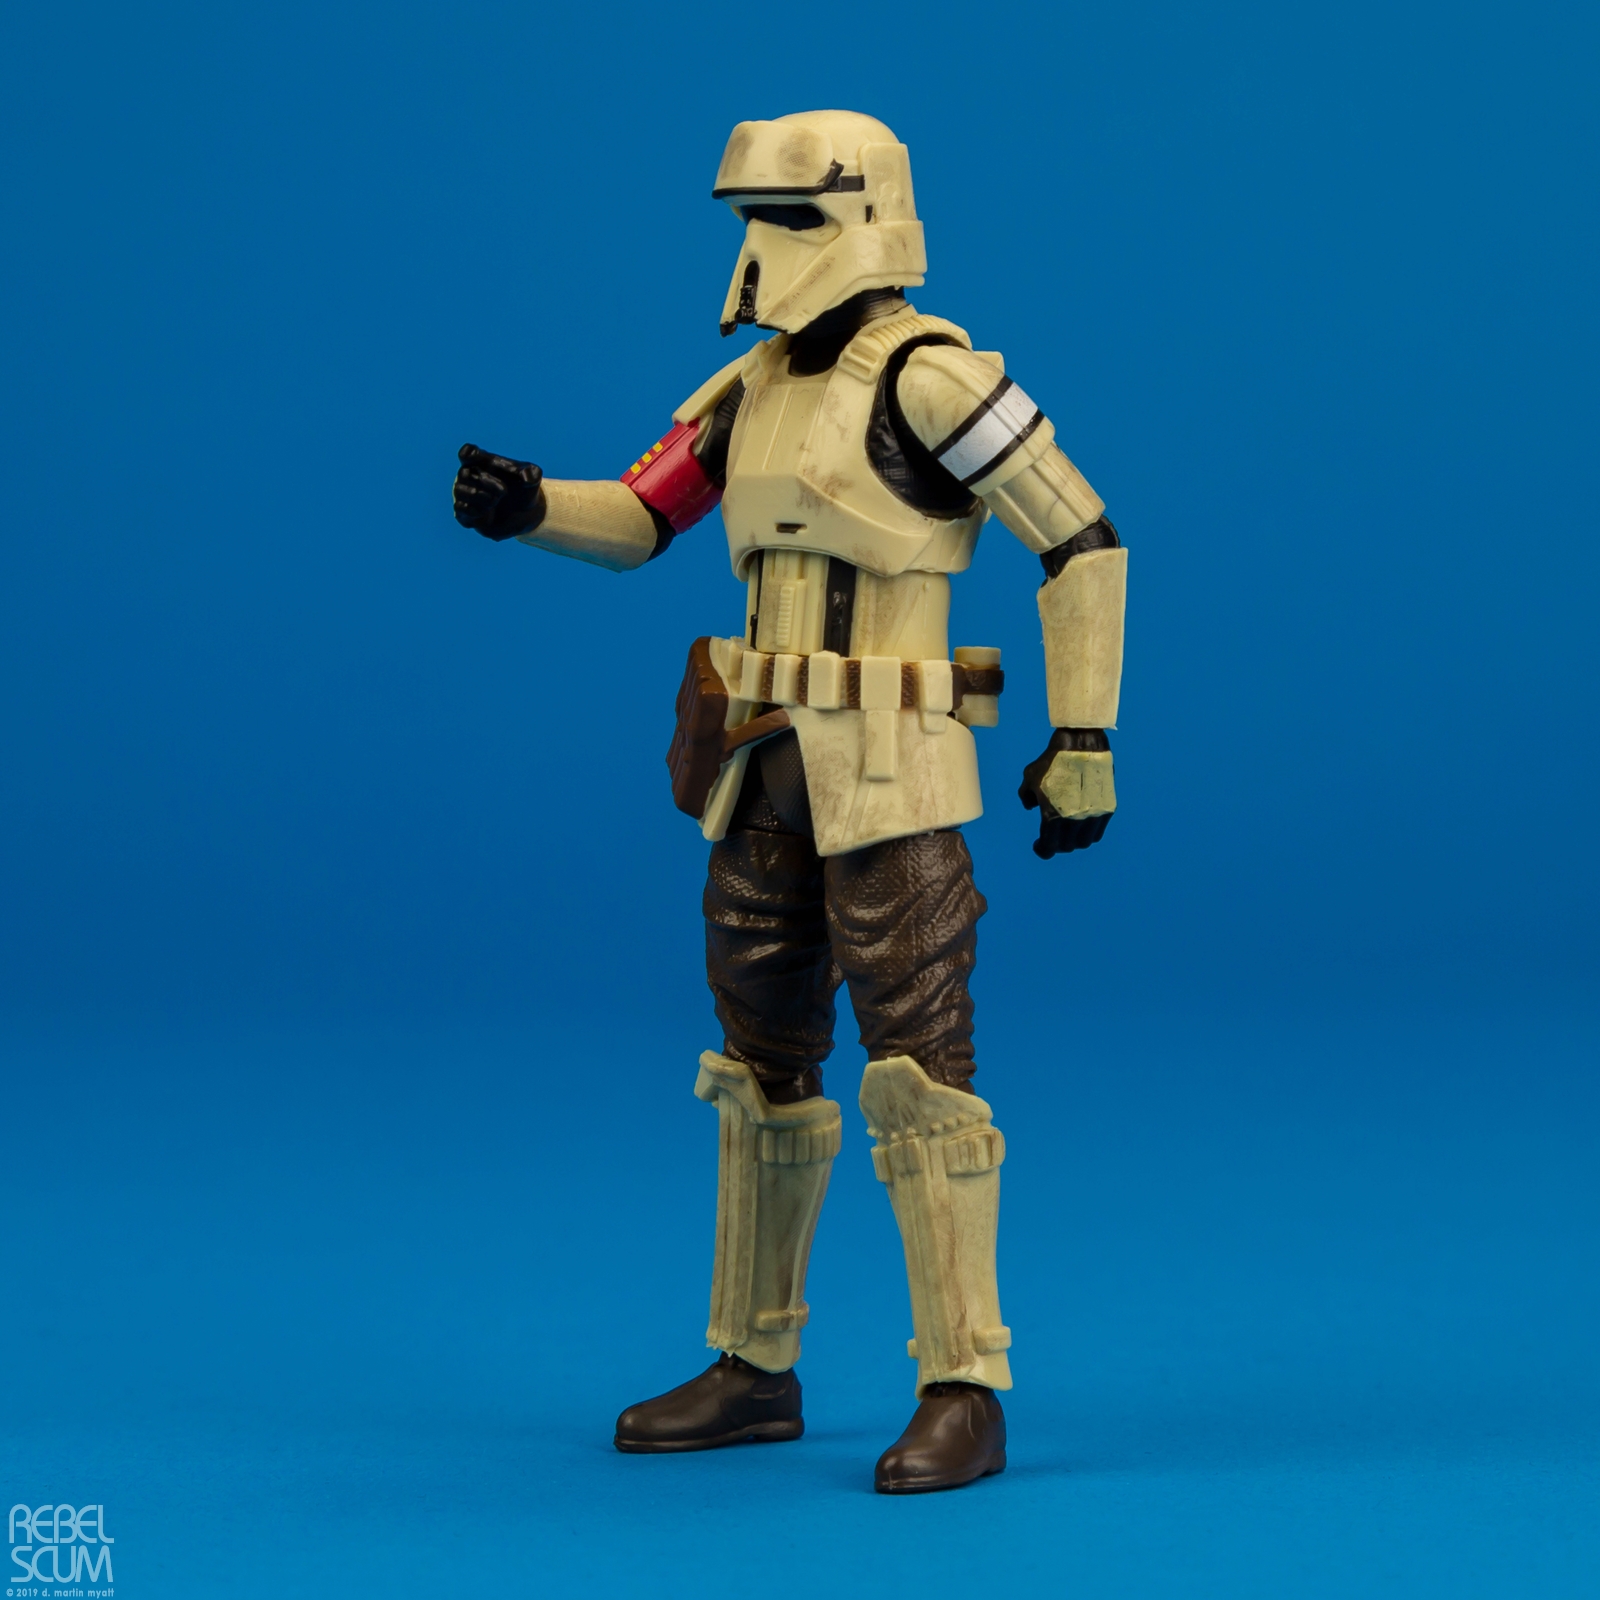 VC133-Scarif-Stormtrooper-The-Vintage-Collection-Hasbro-003.jpg